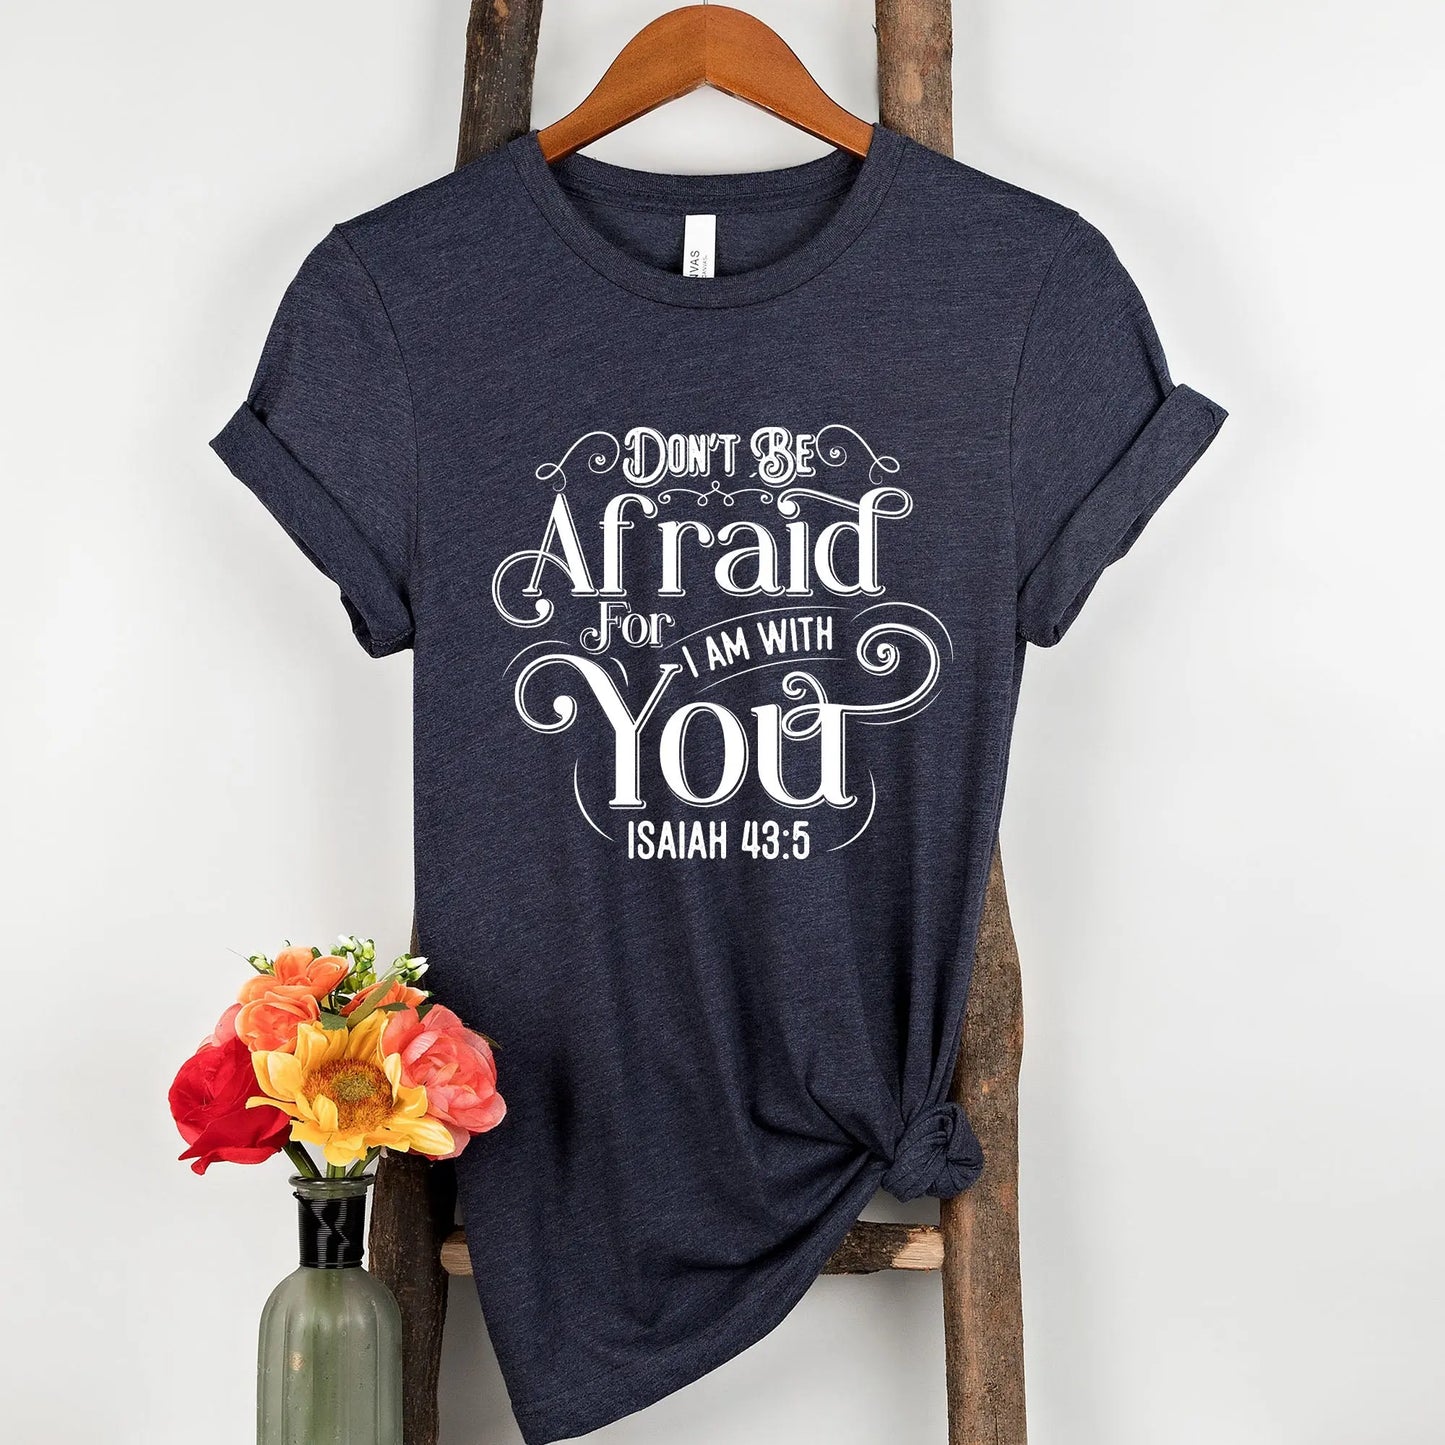 Don't Be Afraid For I Am With You Unisex T-shirt | Isaiah 43:5 Amazing Faith Designs